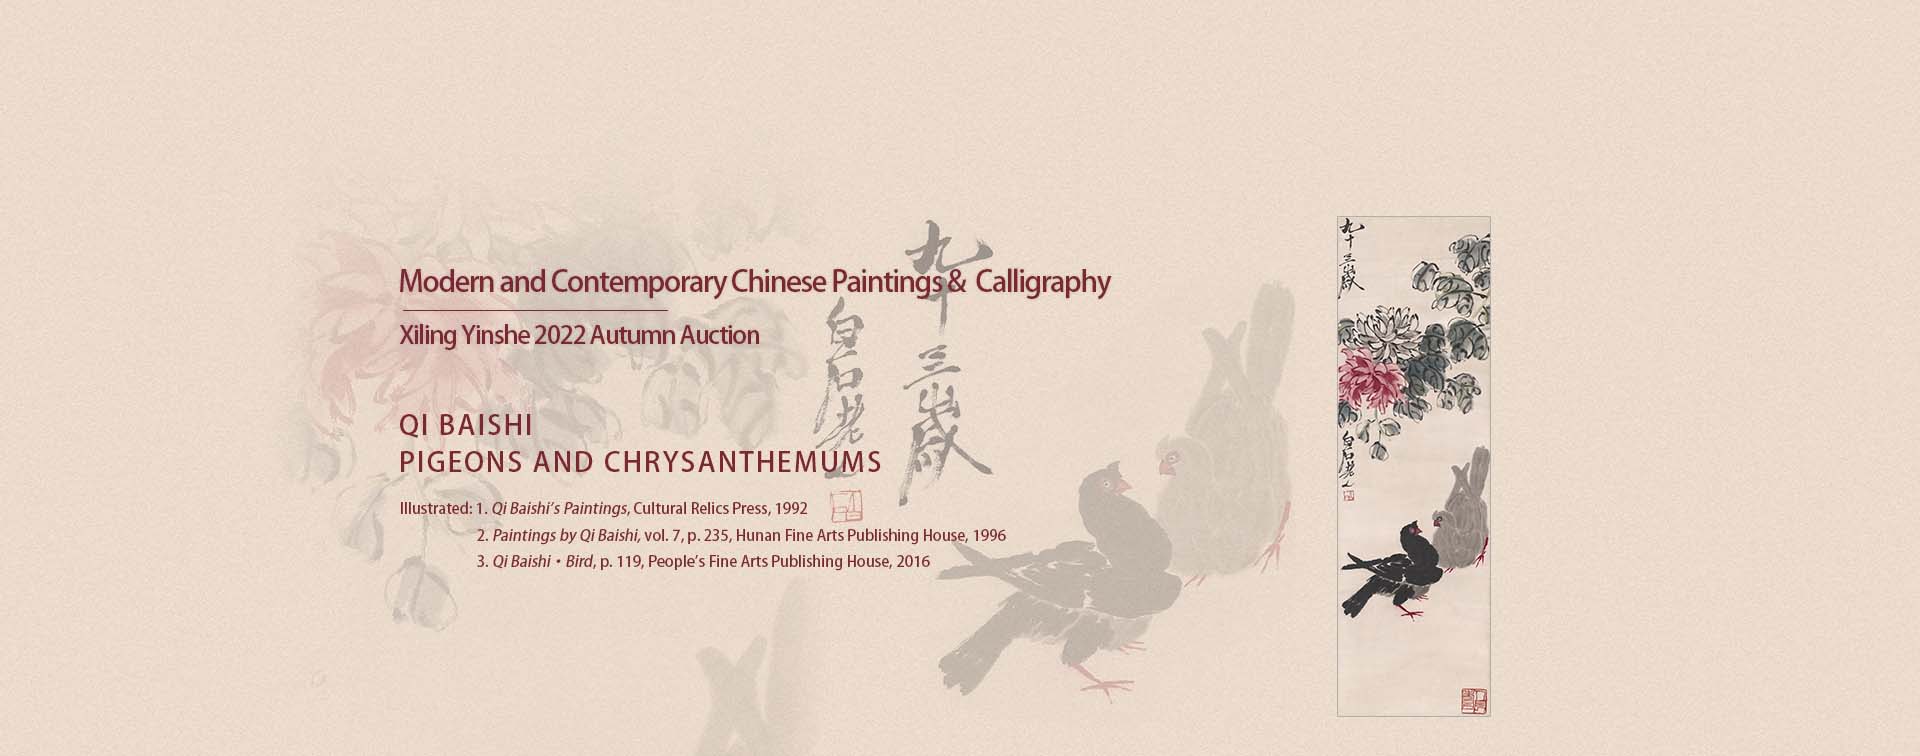 Xiling Yinshe 2022 Autumn Auction / Modern and Contemporary Chinese Paintings and Calligraphy